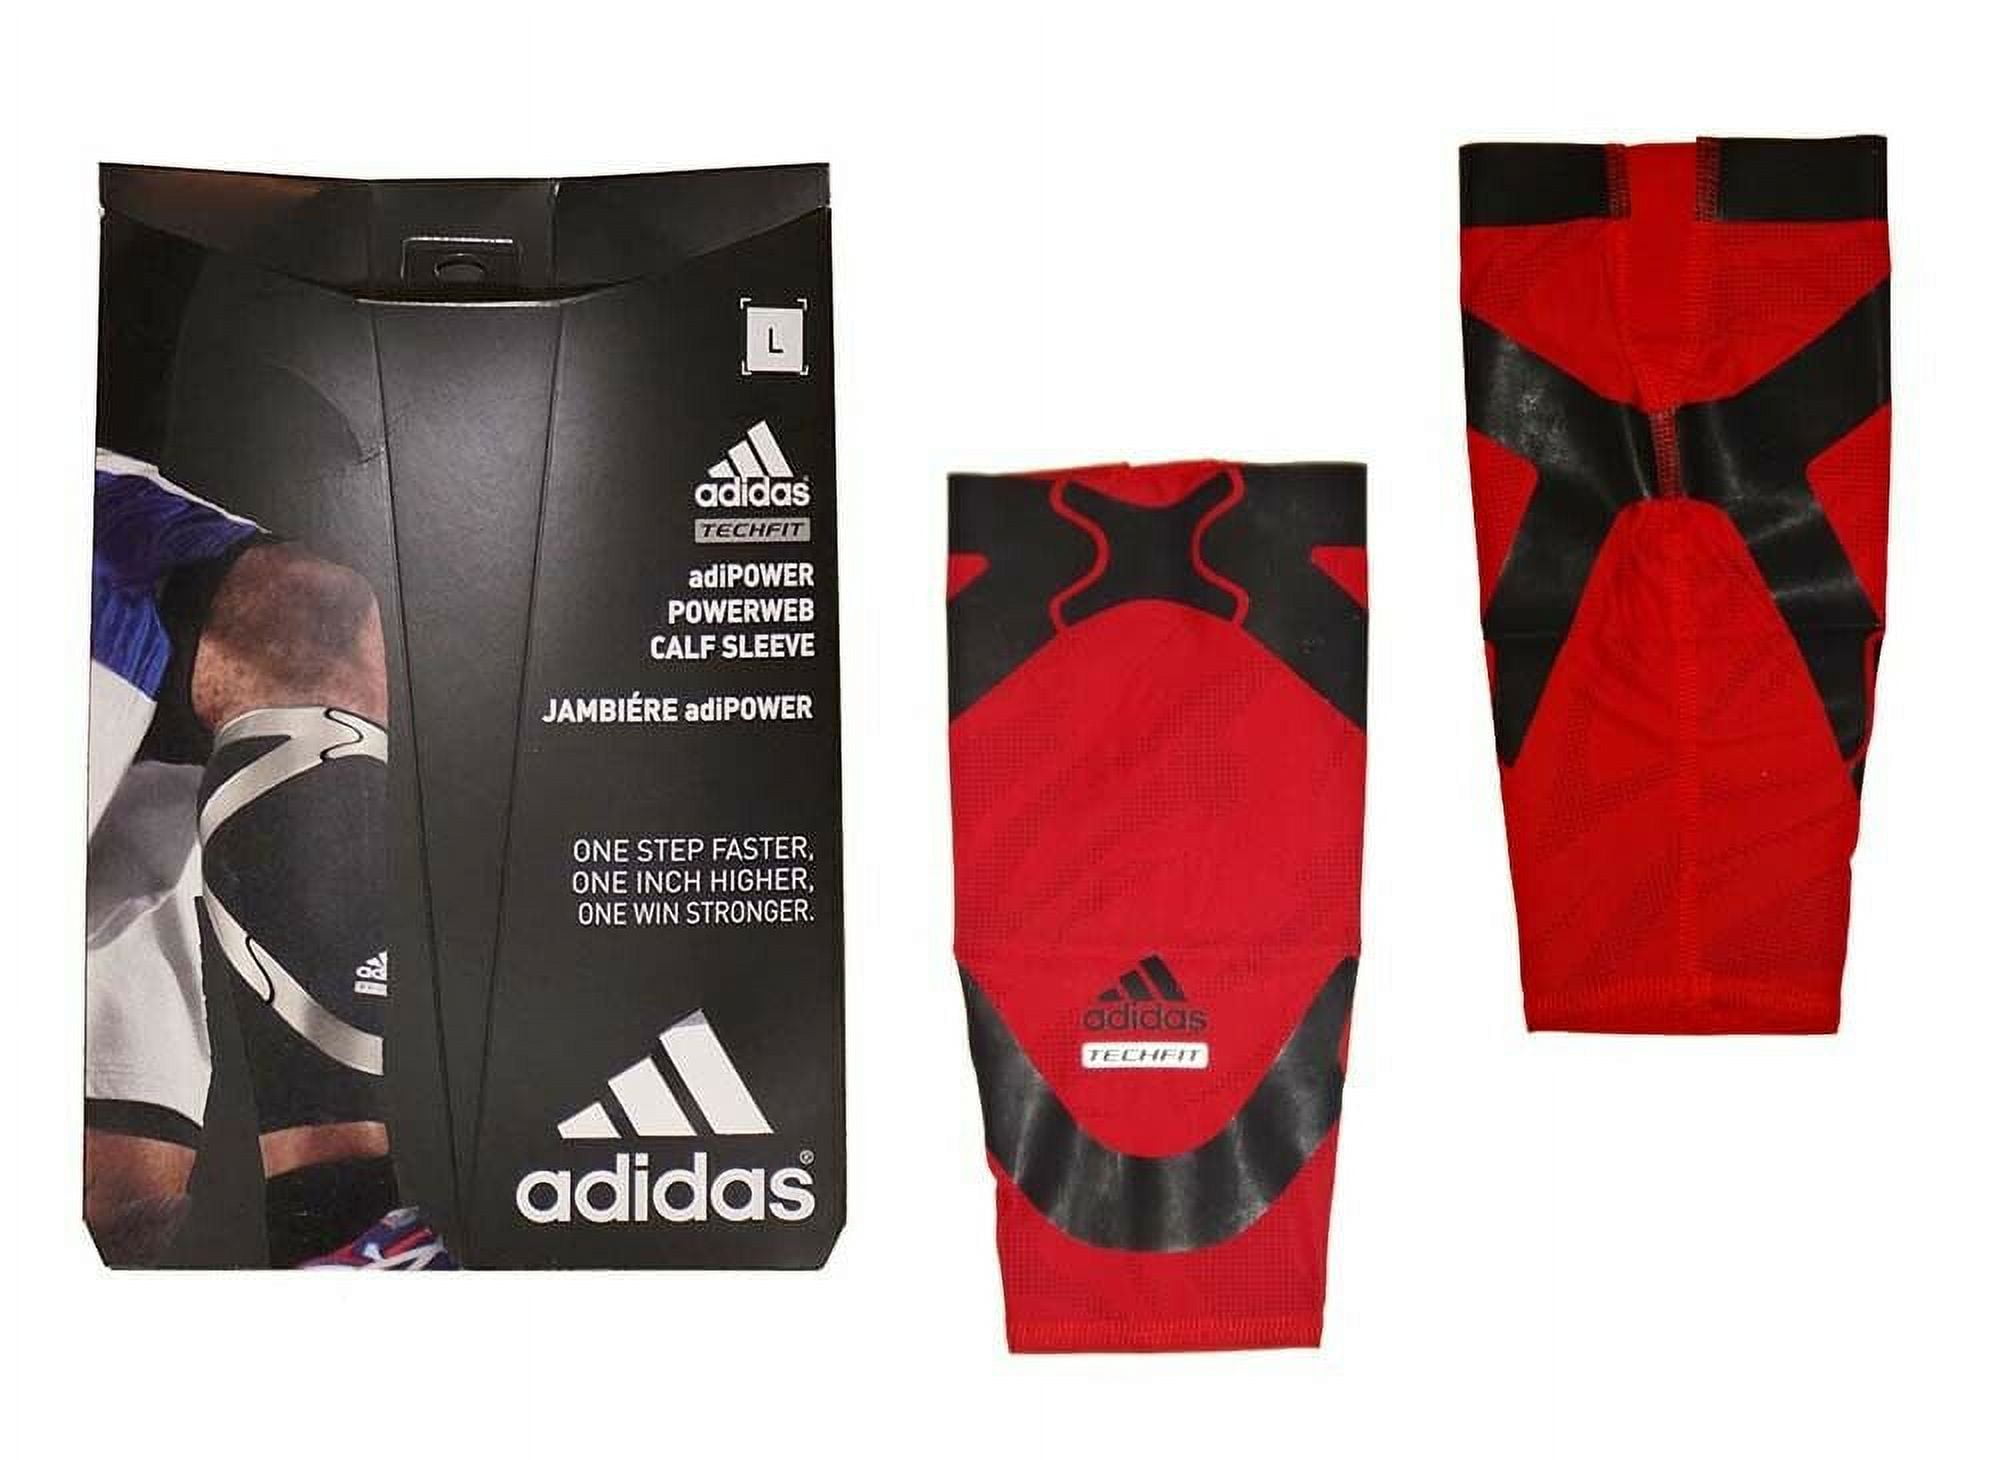 Adidas Techfit Men's Basketball Jambiere adiPOWER Powerweb Compression Calf  Sleeve - Red/Black 